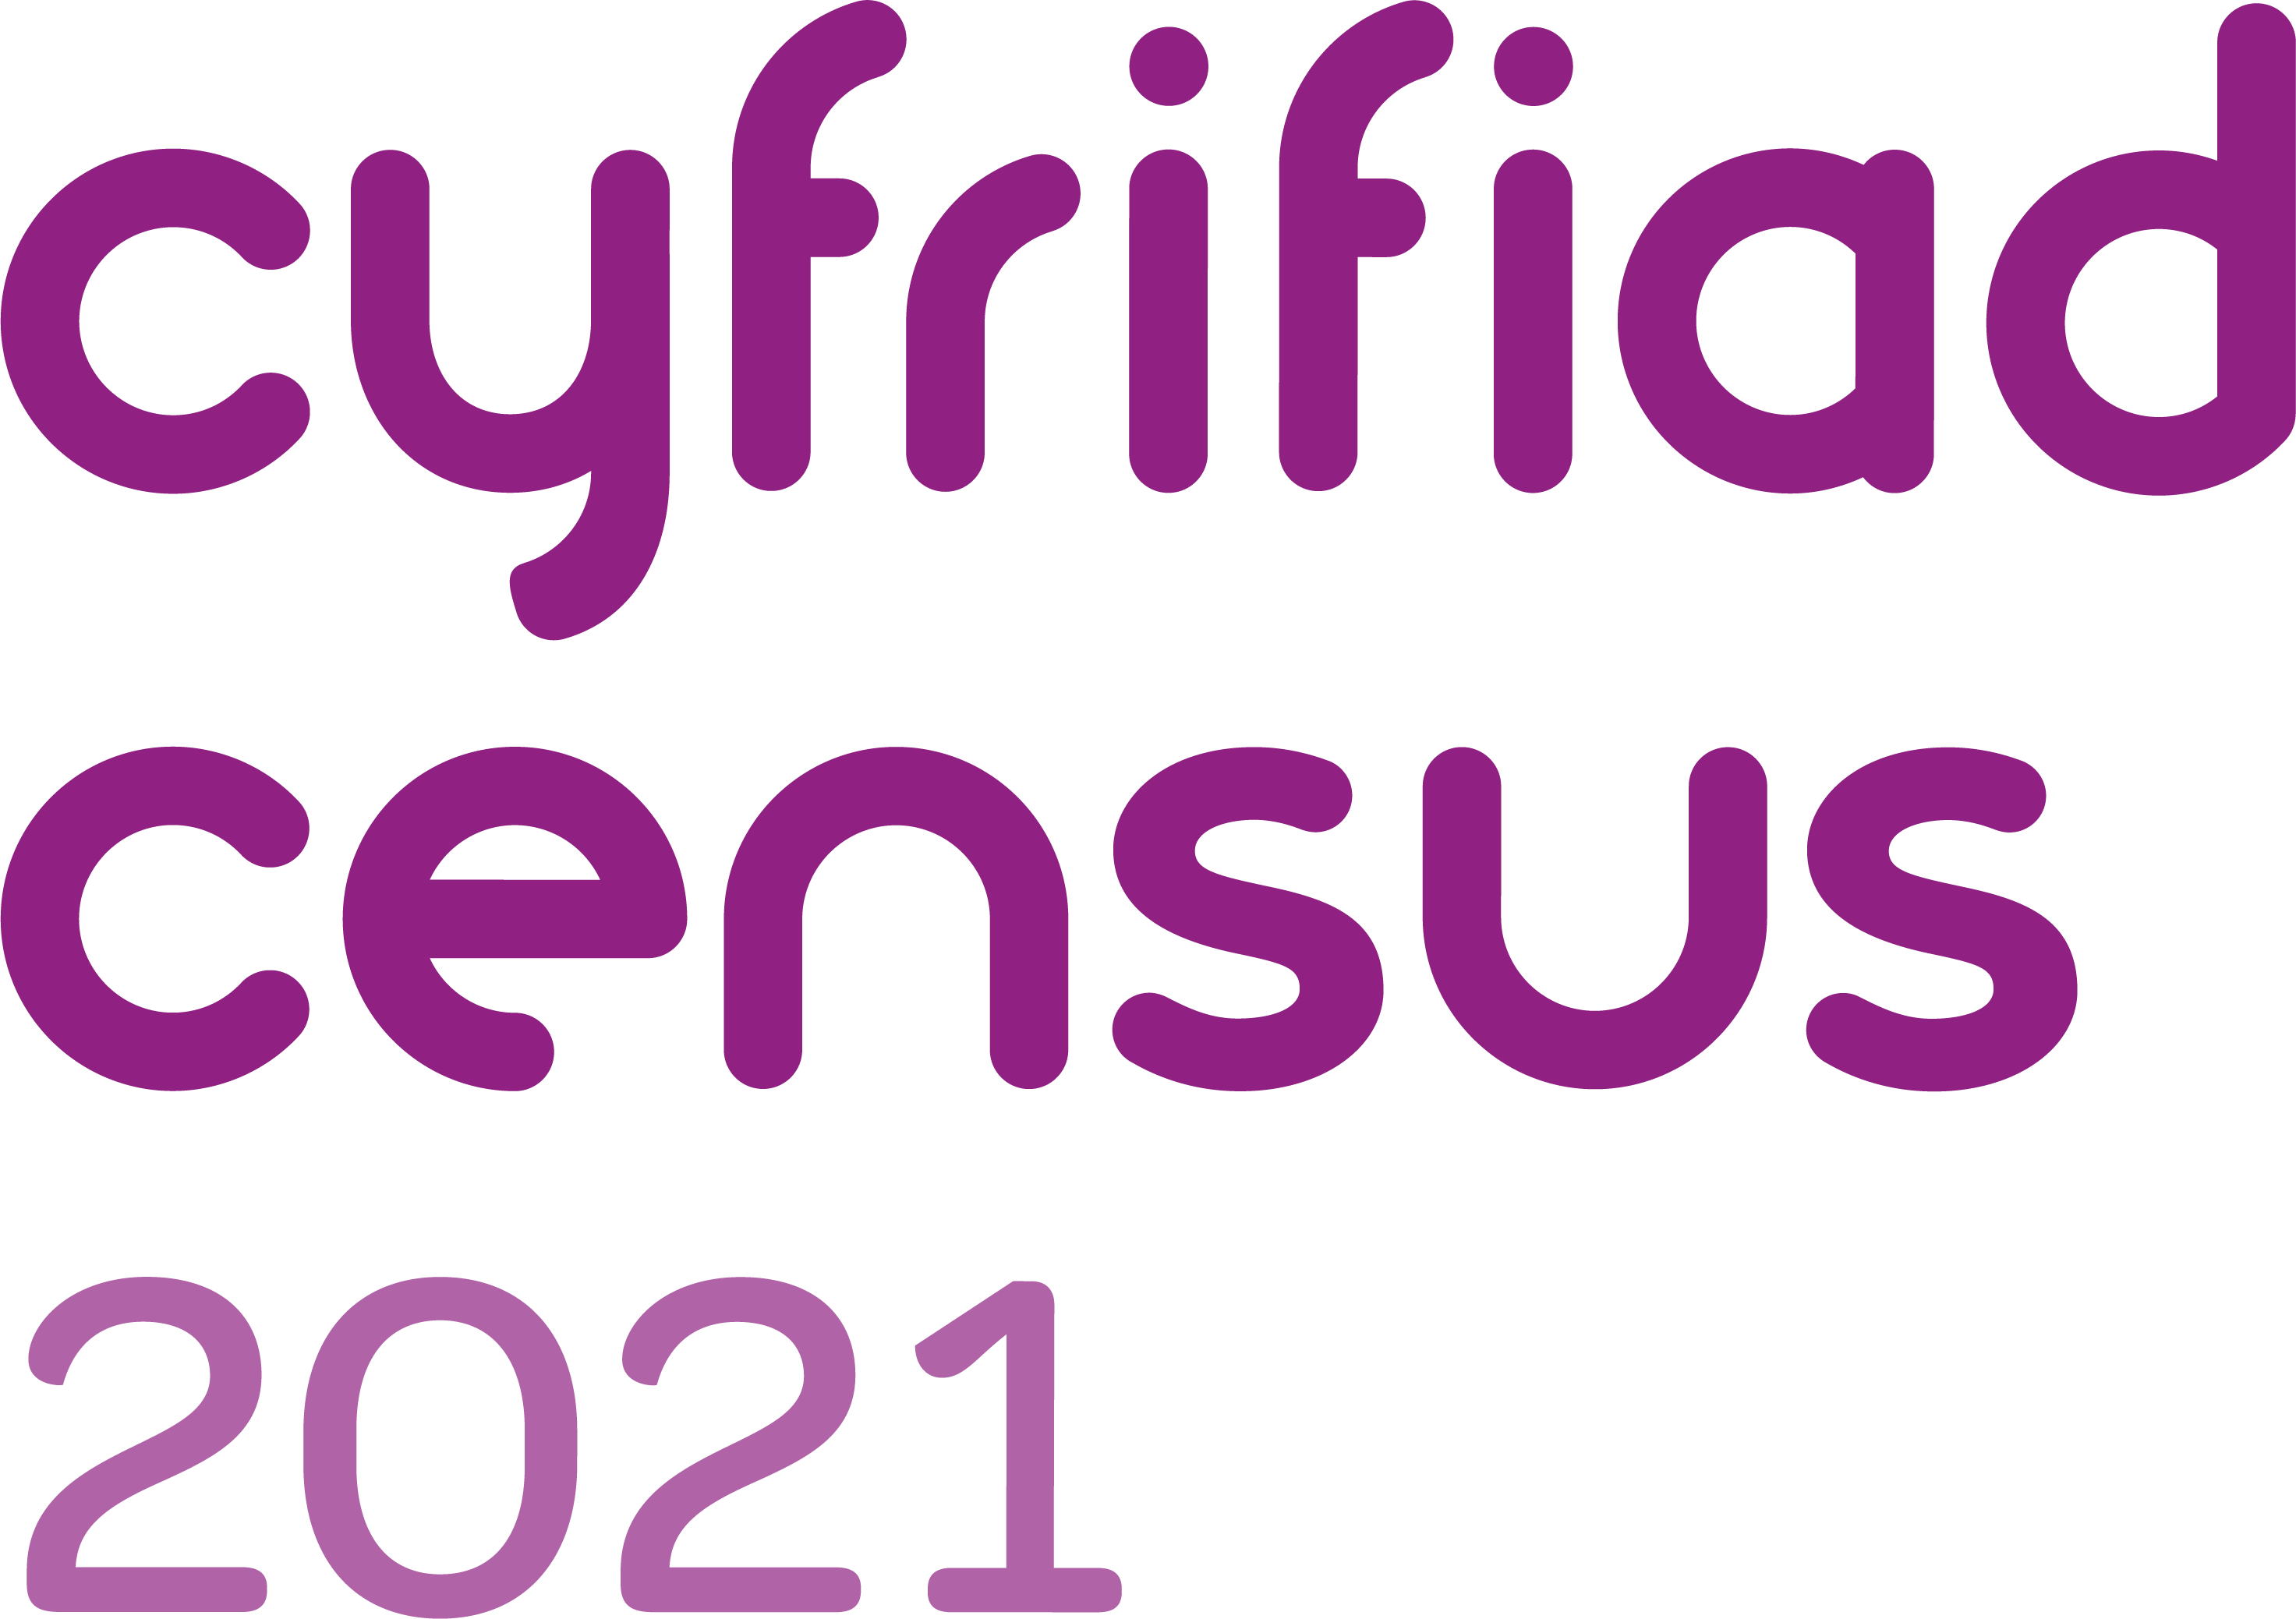 Census 2021 logo which reads 